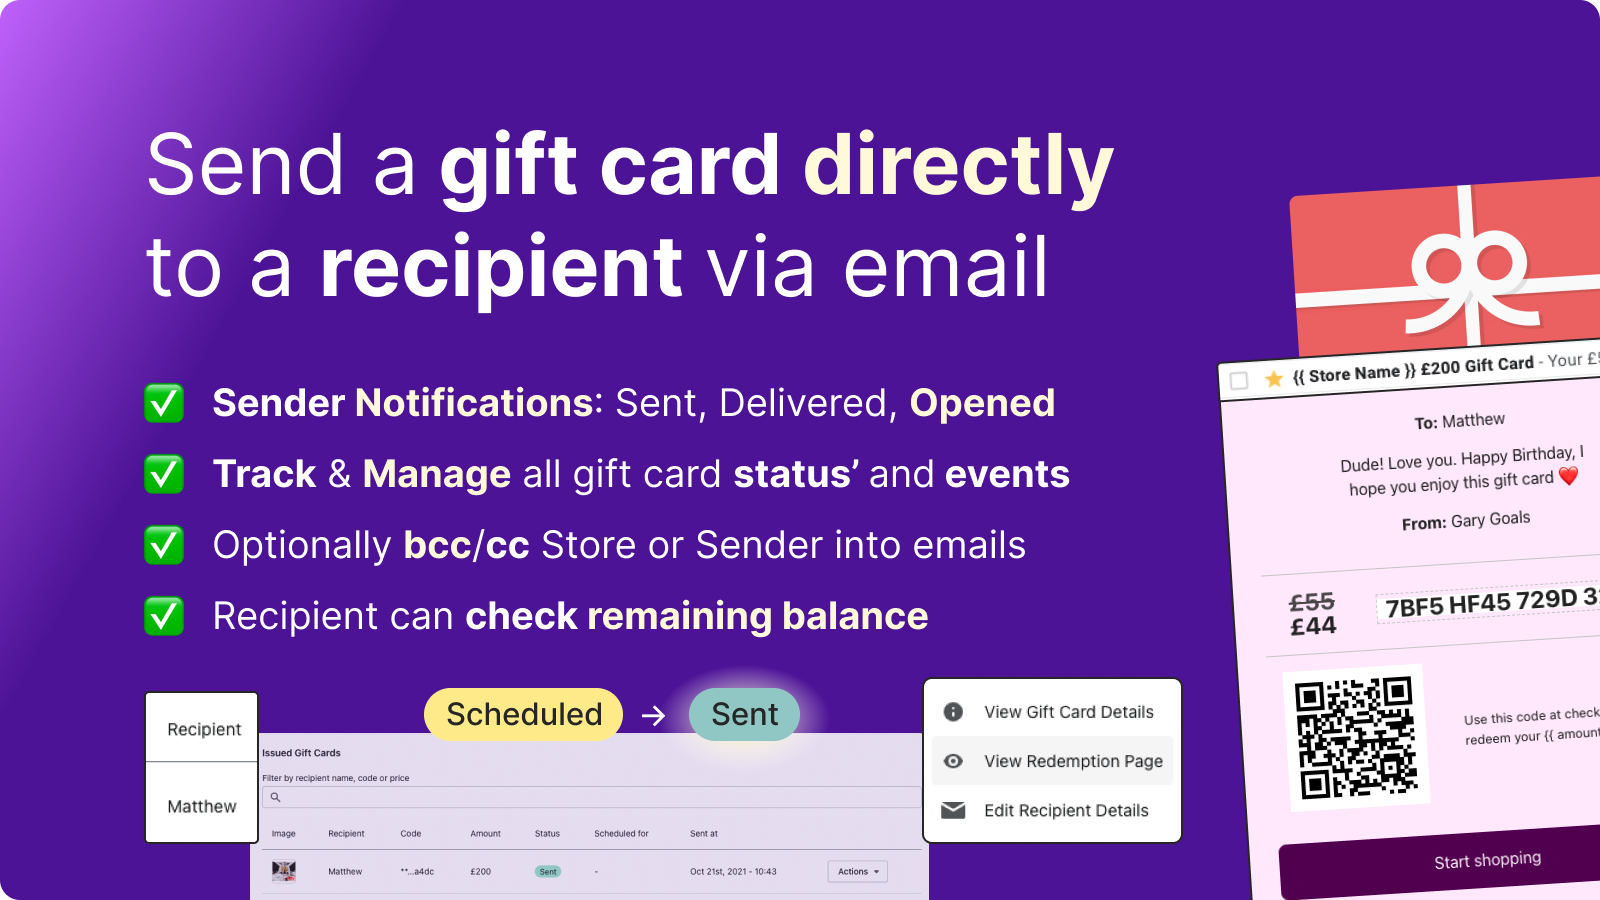 Send gift cards directly to a recipient. via email